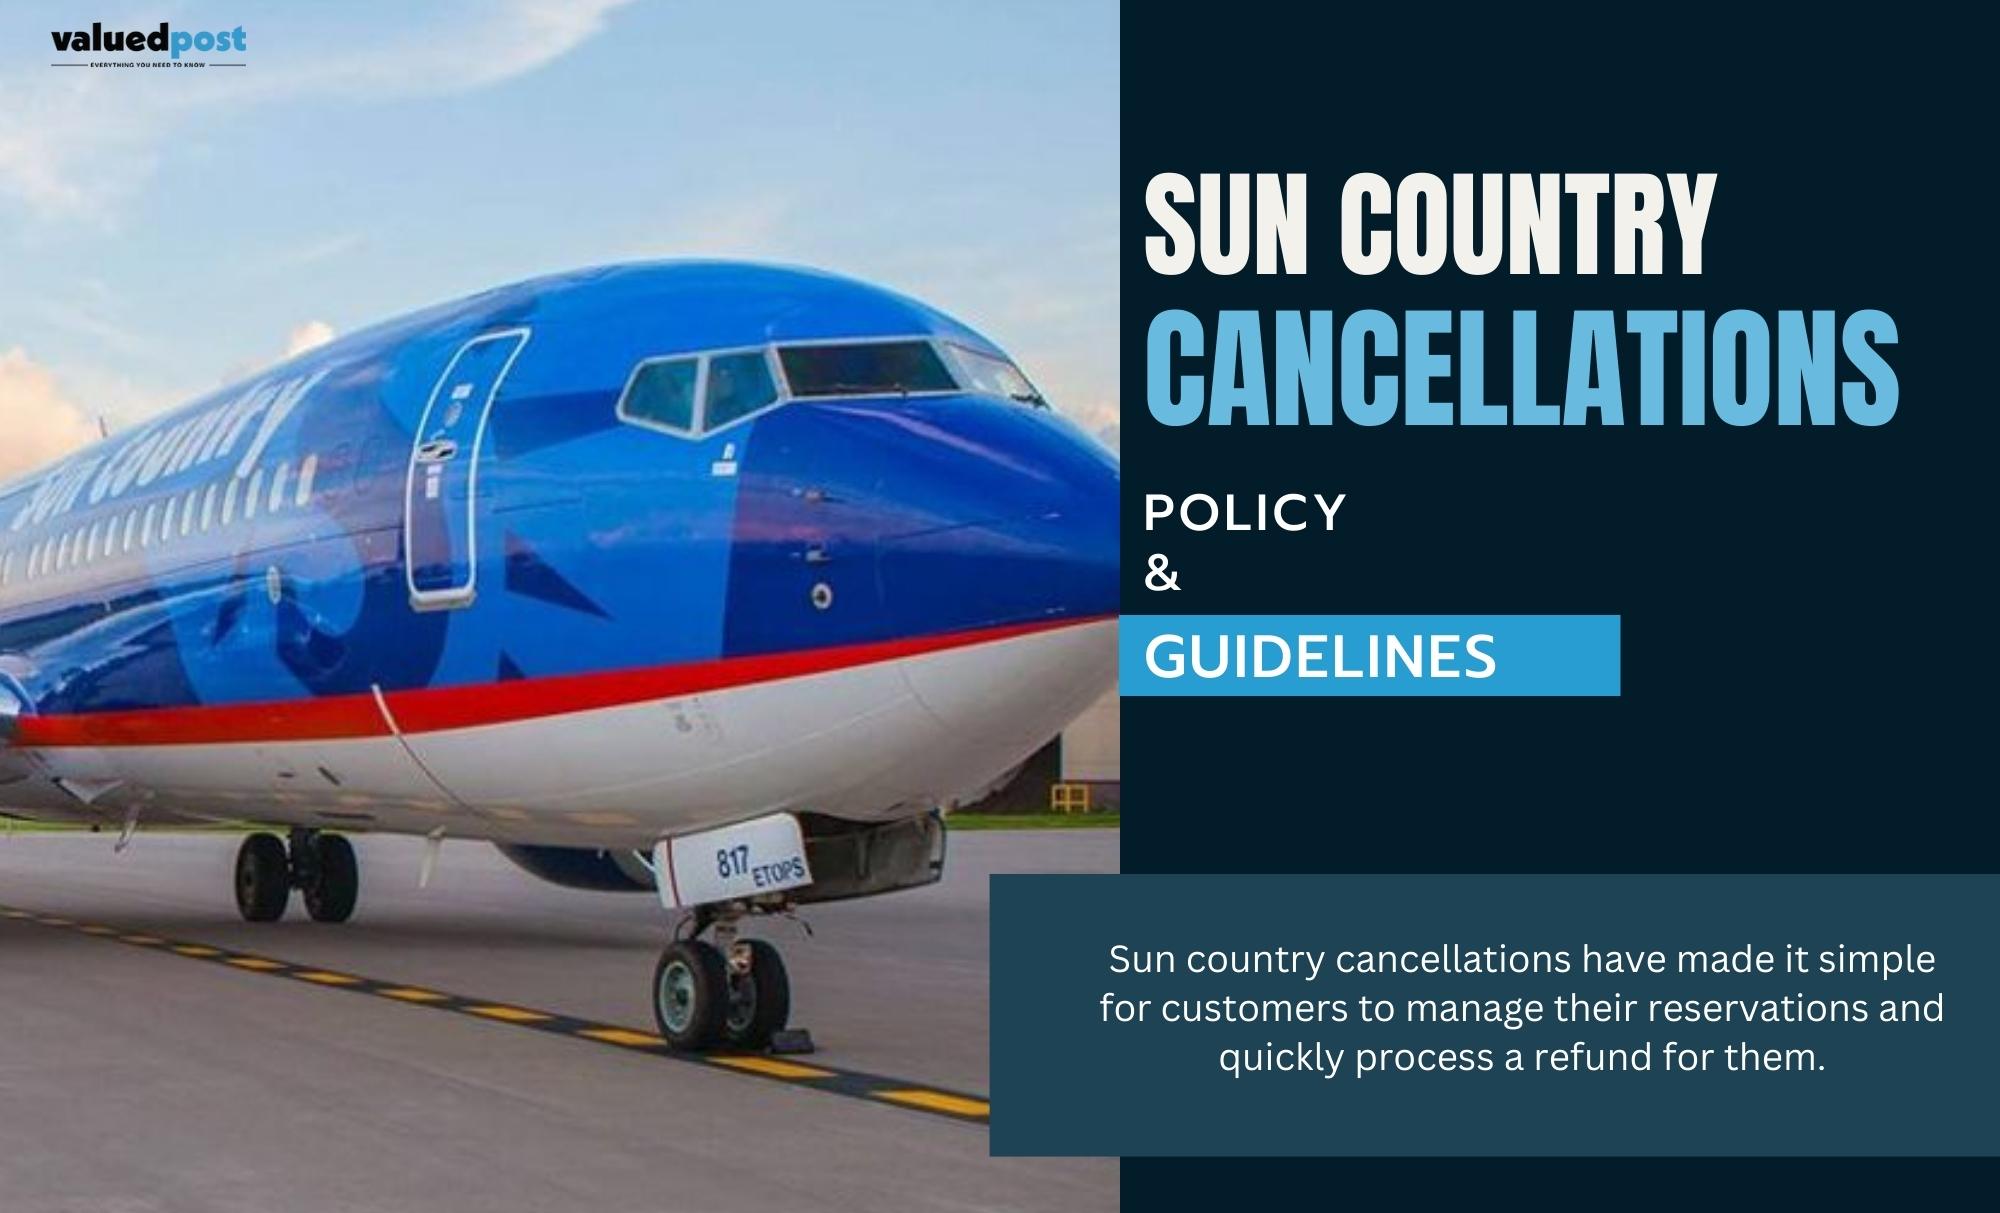 Sun Country Cancellation policy ValuedPost